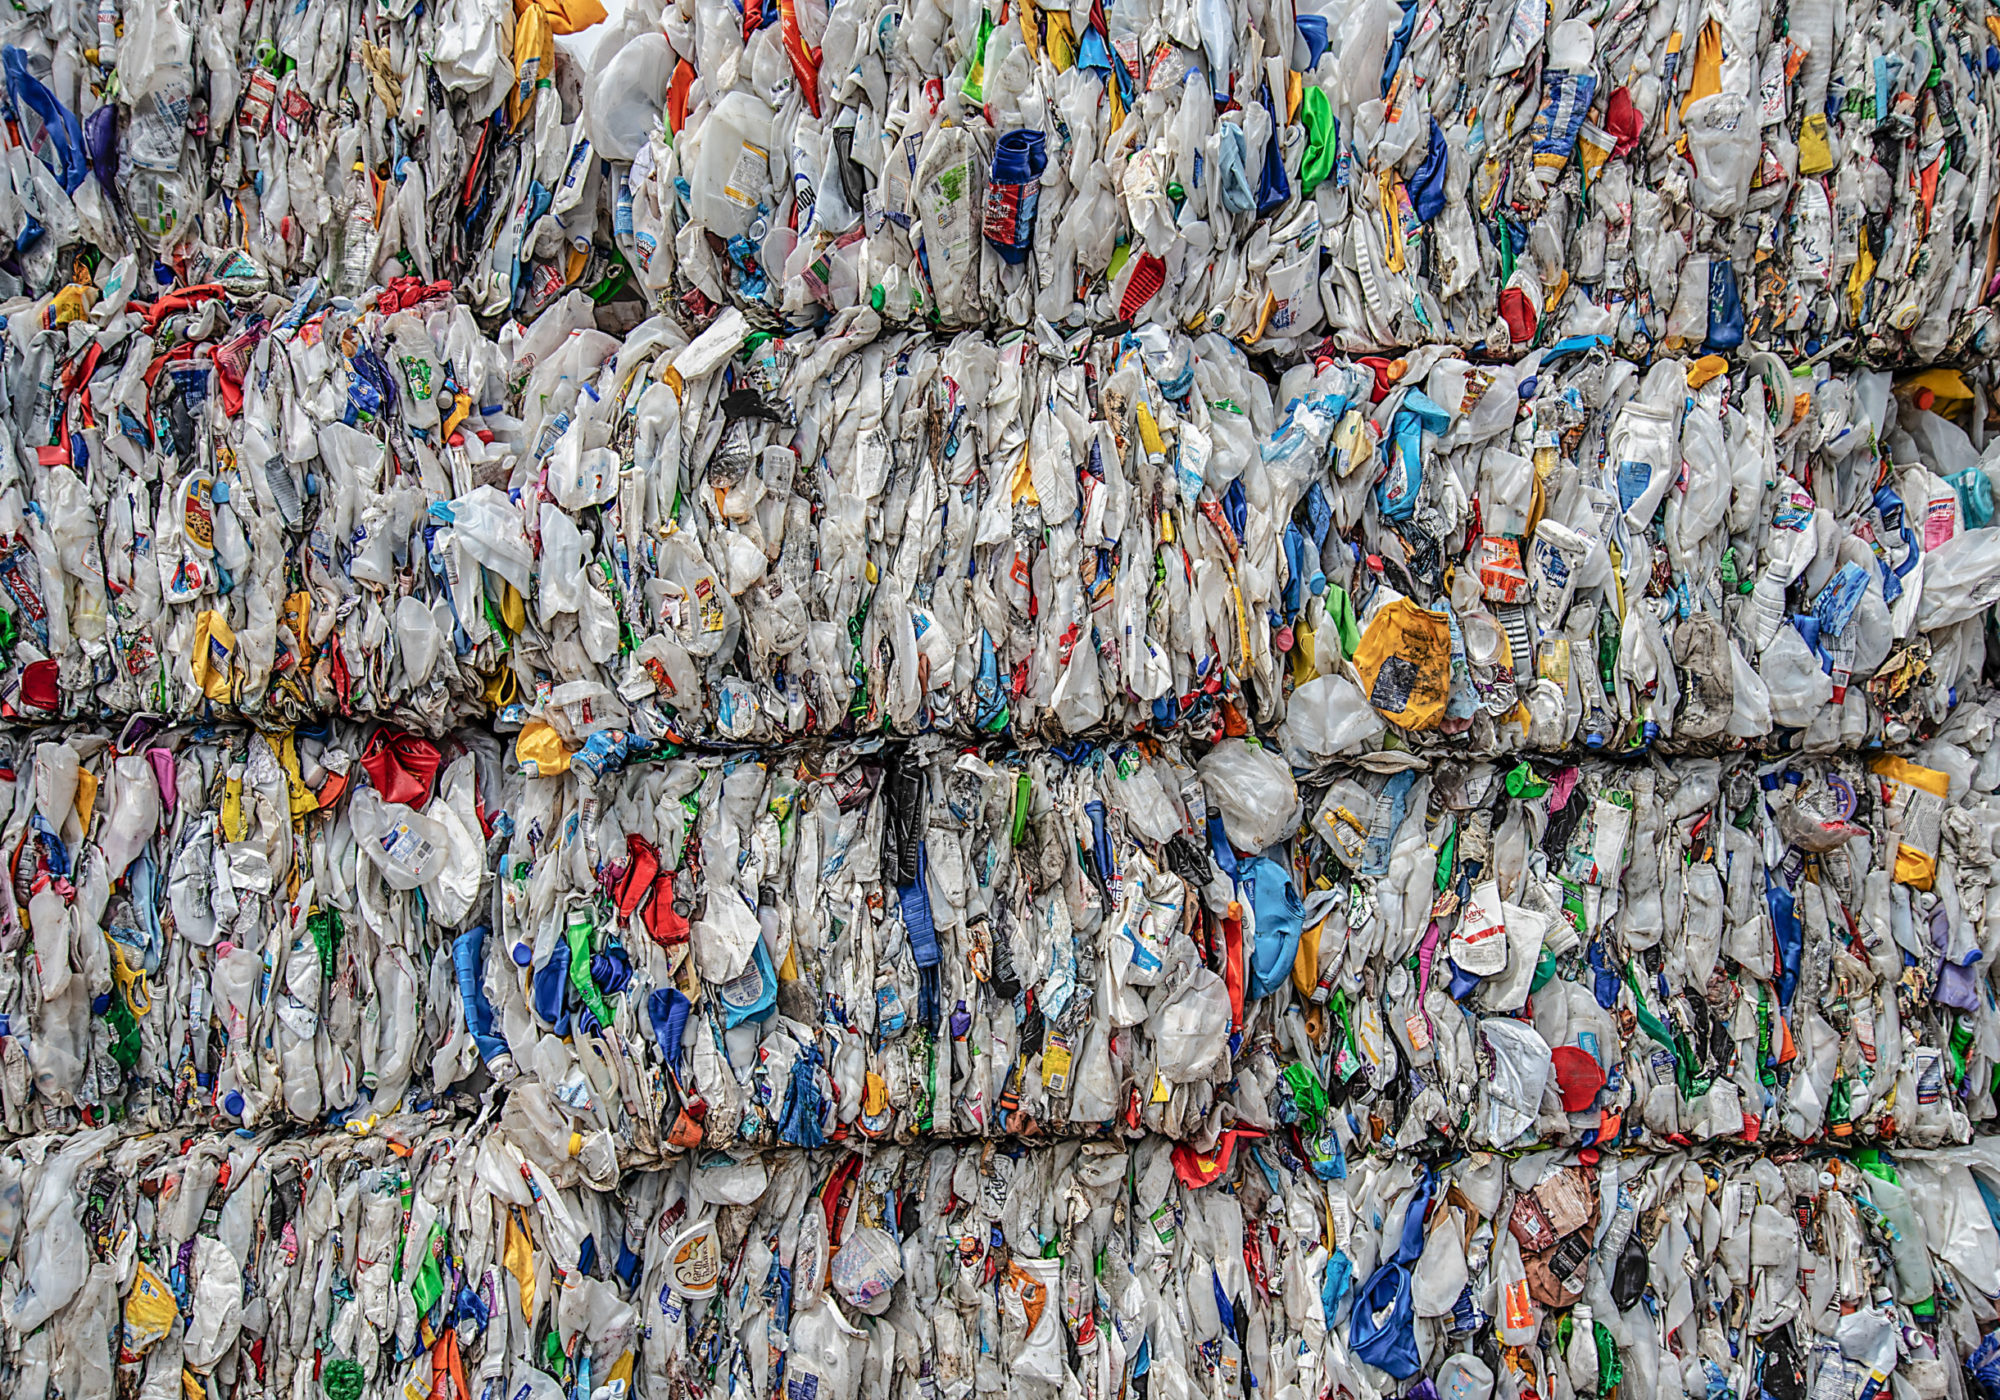 Plastic bales at Greenstar Recycling, which used to sell plastic to China before Beijing sharply curbed imports of plastic waste over environmental concerns. CREDIT: Teake Zuidema/Nexus Media News